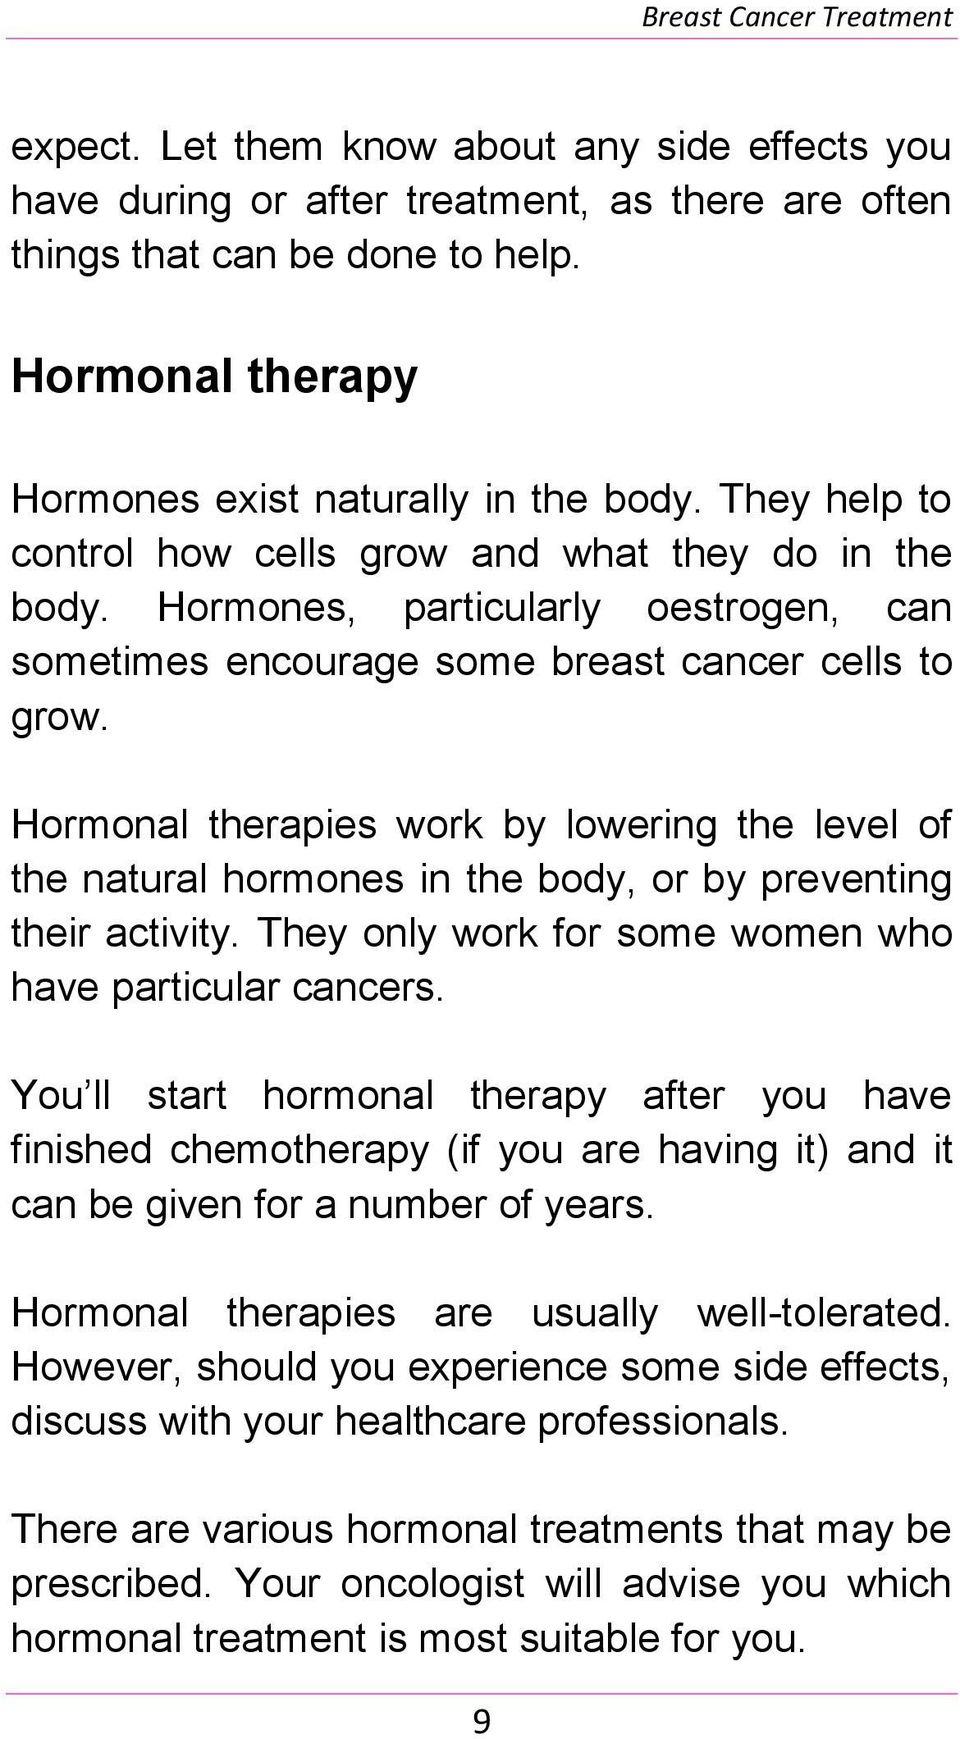 Hormonal therapies work by lowering the level of the natural hormones in the body, or by preventing their activity. They only work for some women who have particular cancers.